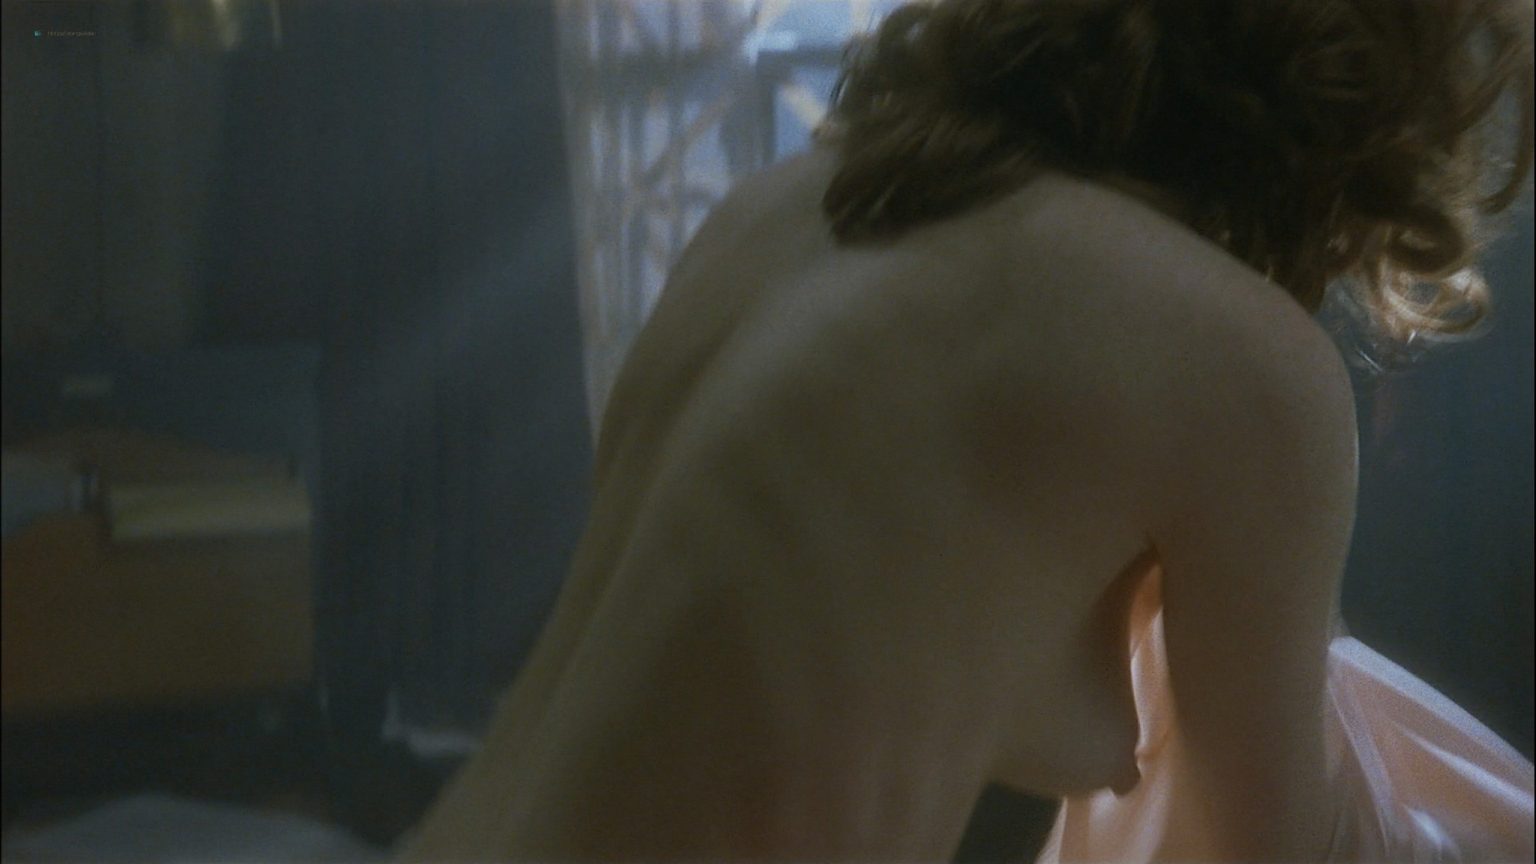 https://www.zorg.video/wp-content/uploads/2017/06/Julianne-Moore-nude-topless-and-sex-The-End-of-the-Affair-1999-HD-1080p-WEB-011-1536x864.jpg